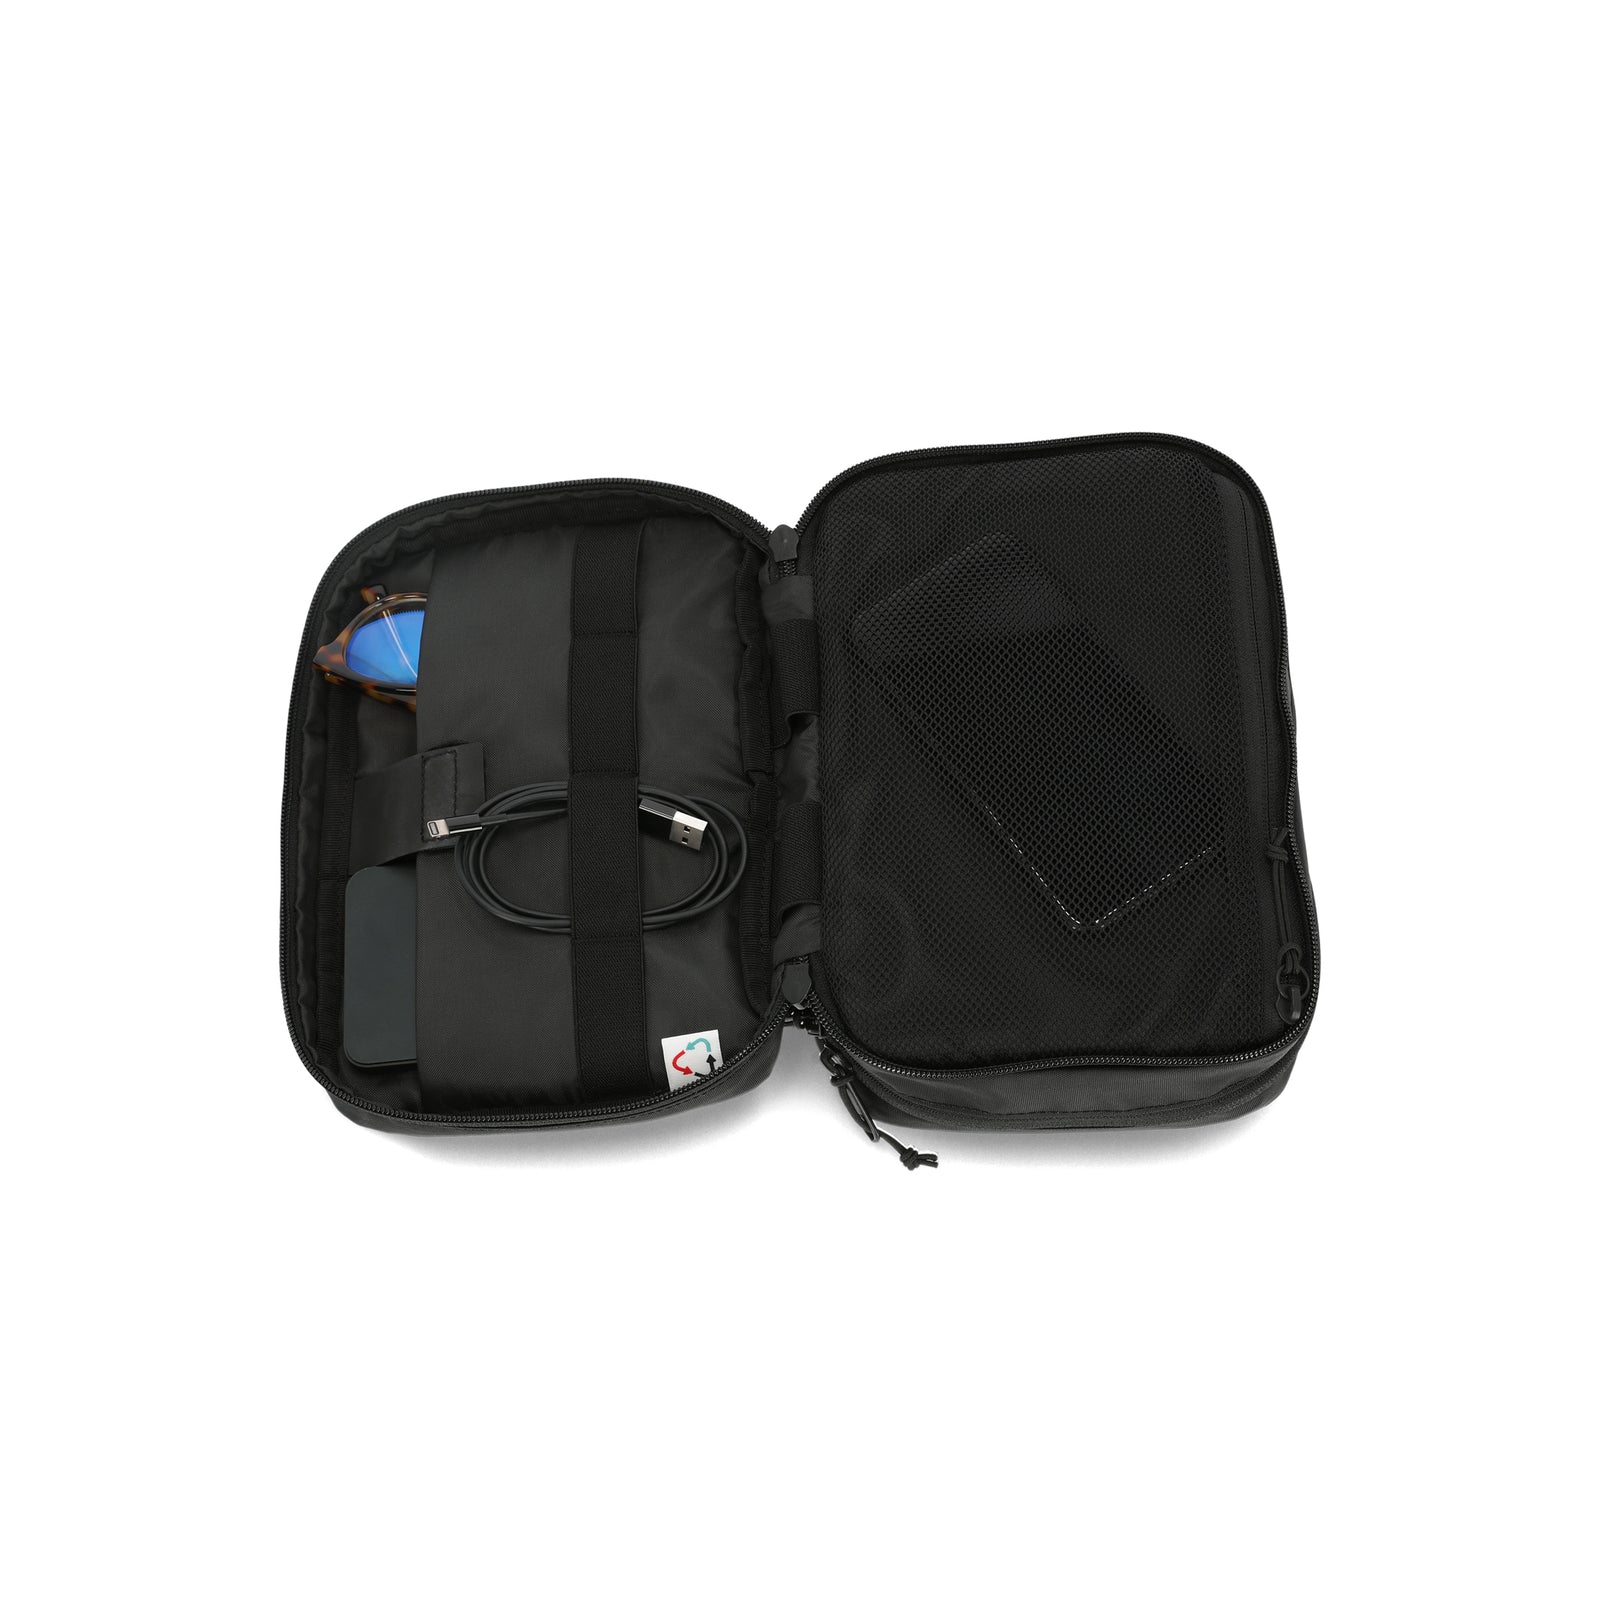 General shot of inside pockets of Topo Designs Tech electronics organization travel Case in black recycled nylon.